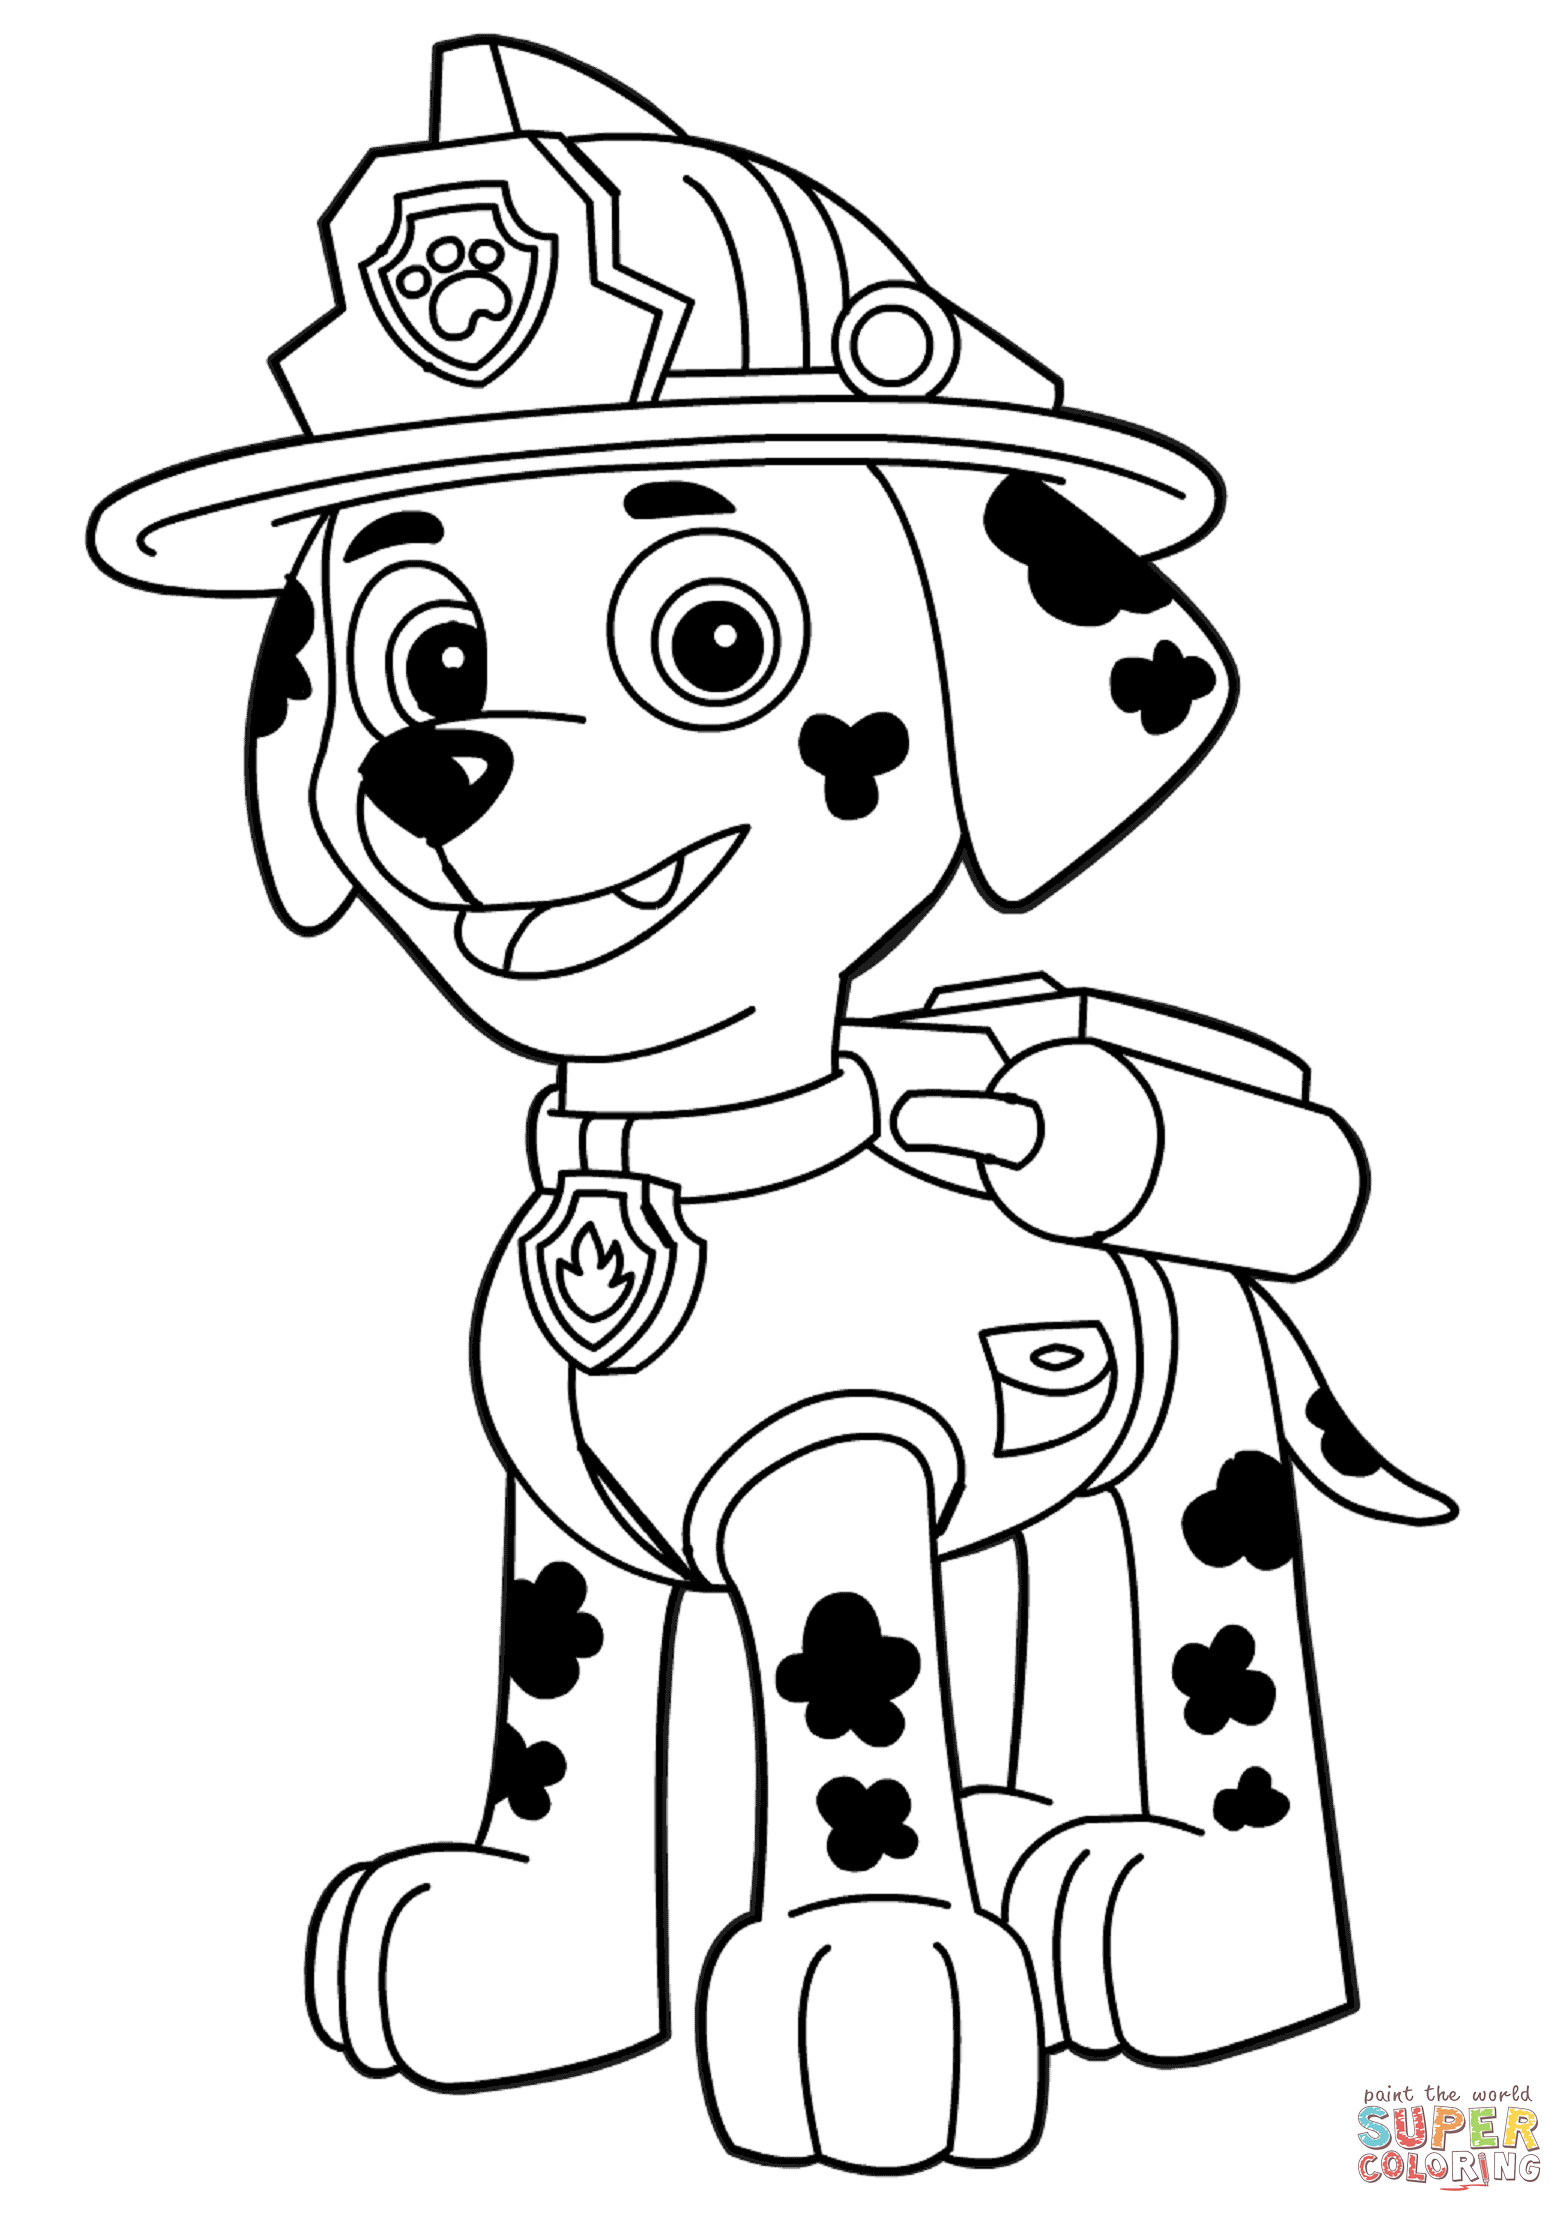 Paw Patrol Coloring Pages Marshall Paw Patrol Marshall Coloring Page Free Printable Coloring Pages